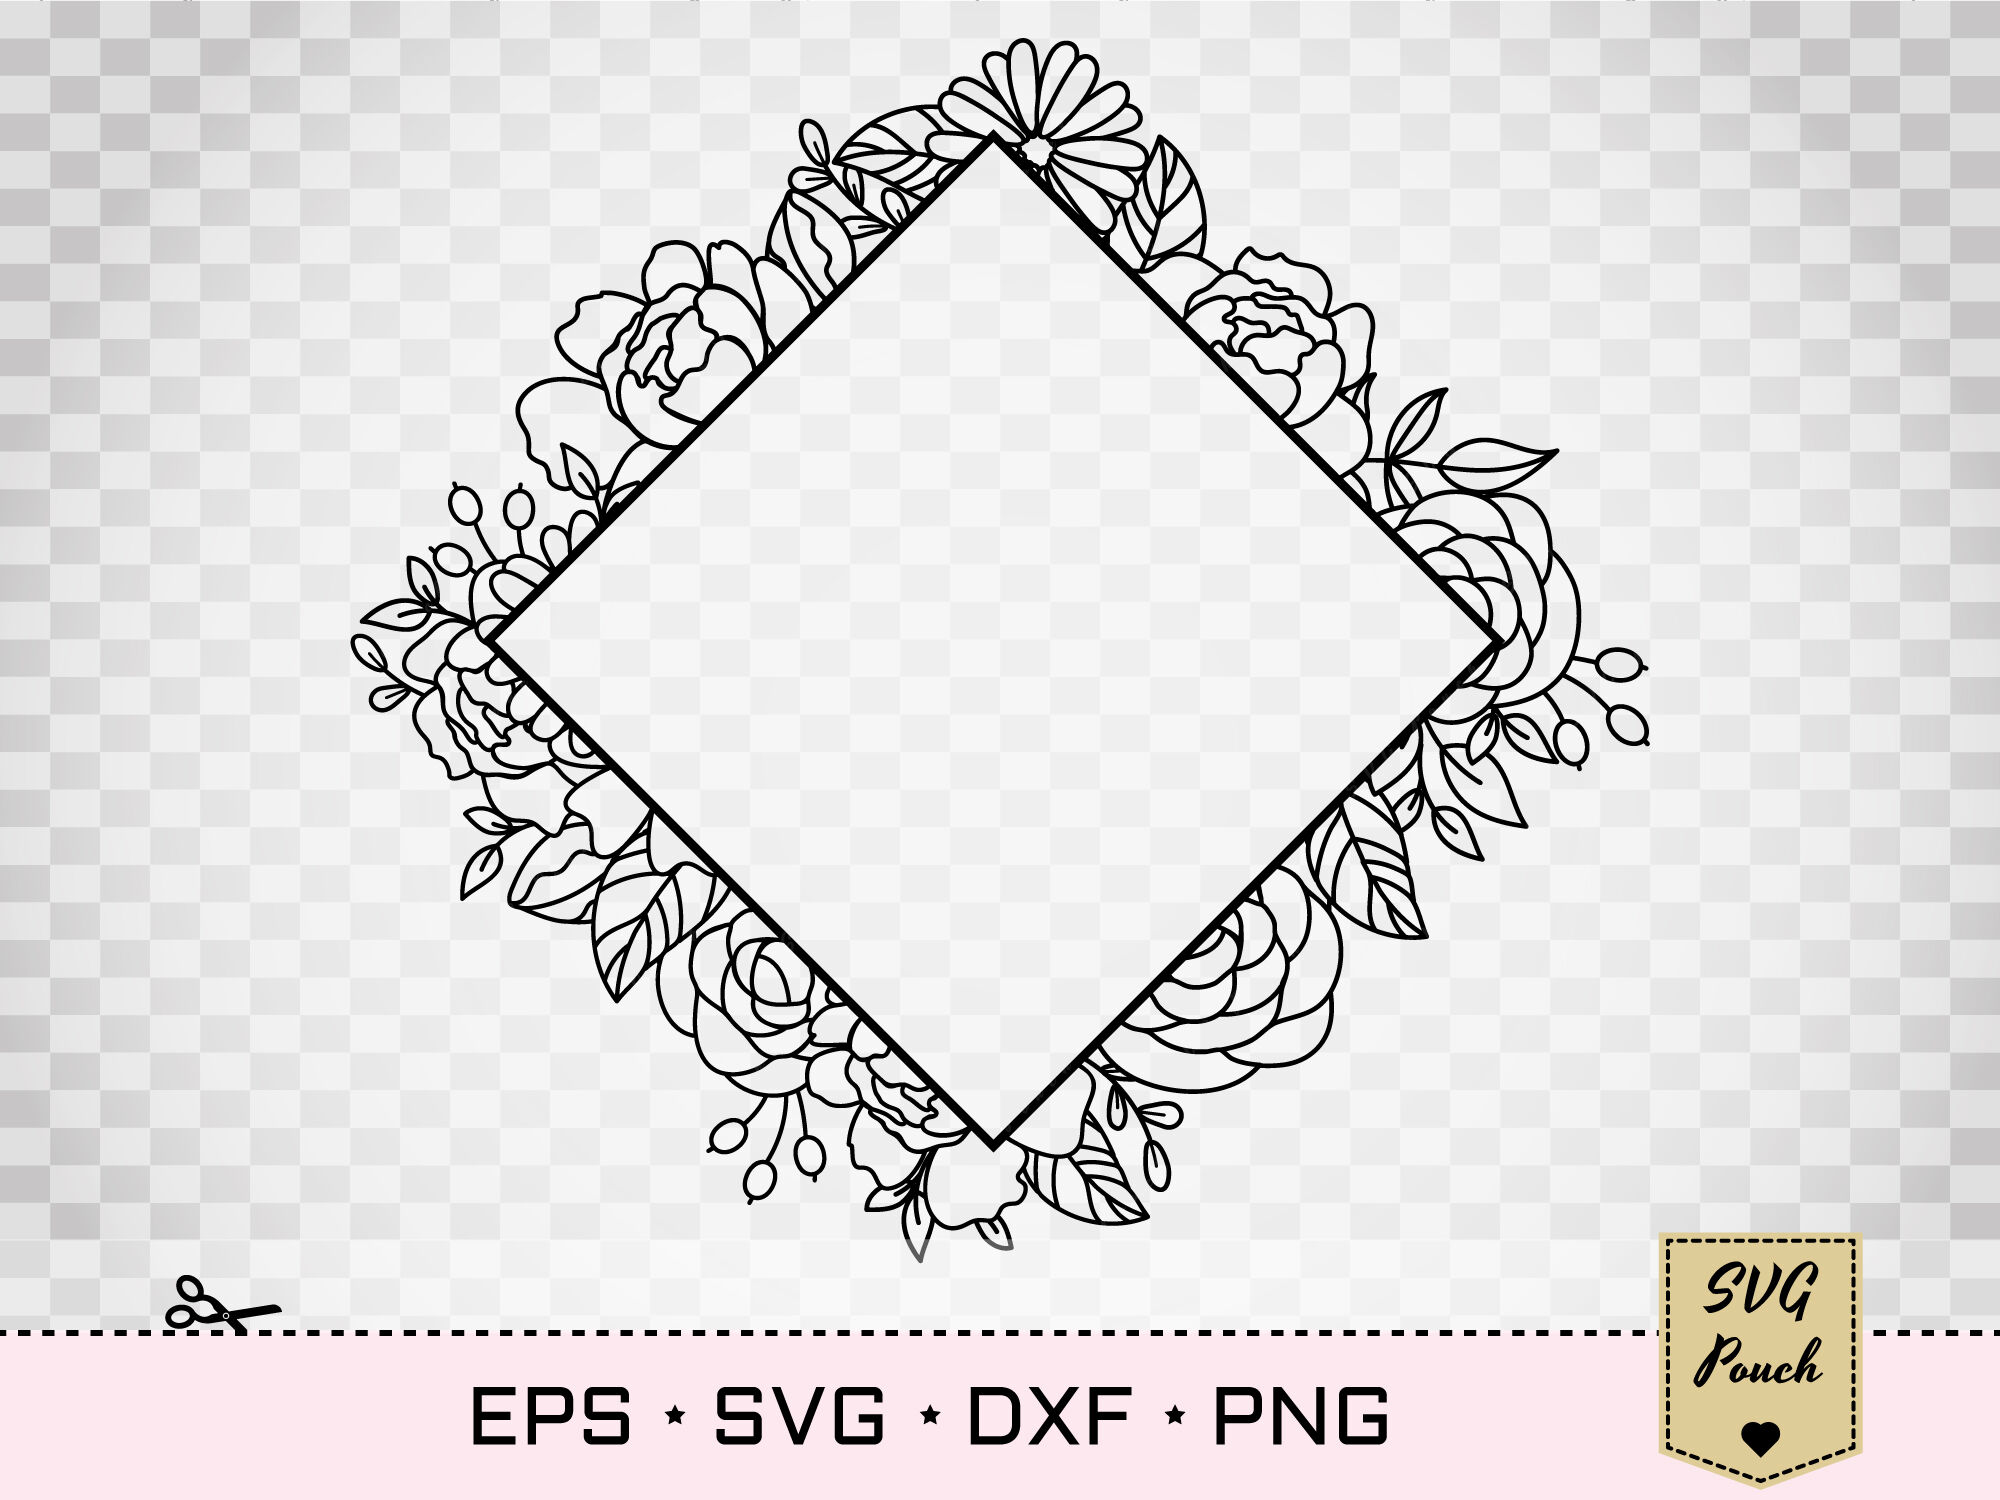 Download Floral Full Square Frame Svg By Svgpouch Thehungryjpeg Com